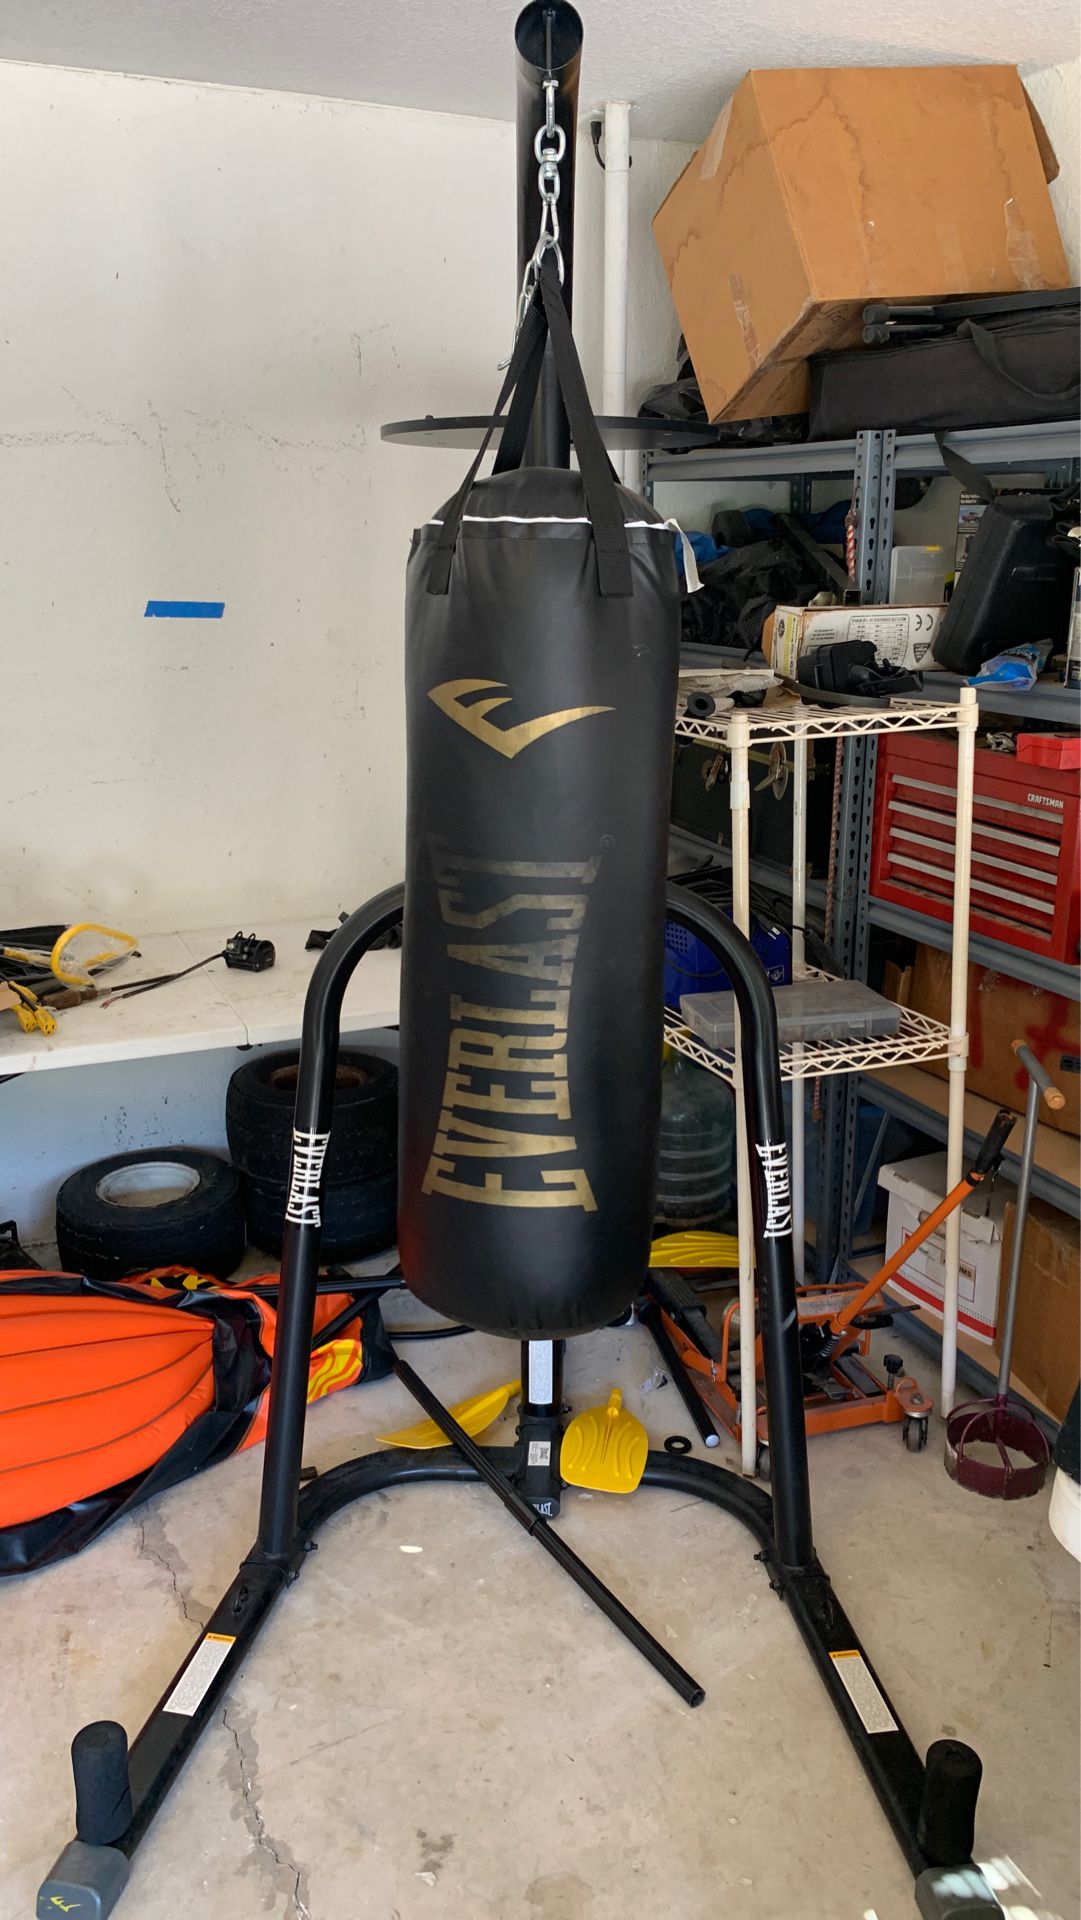 Everlast punching bag with speed bag attachment